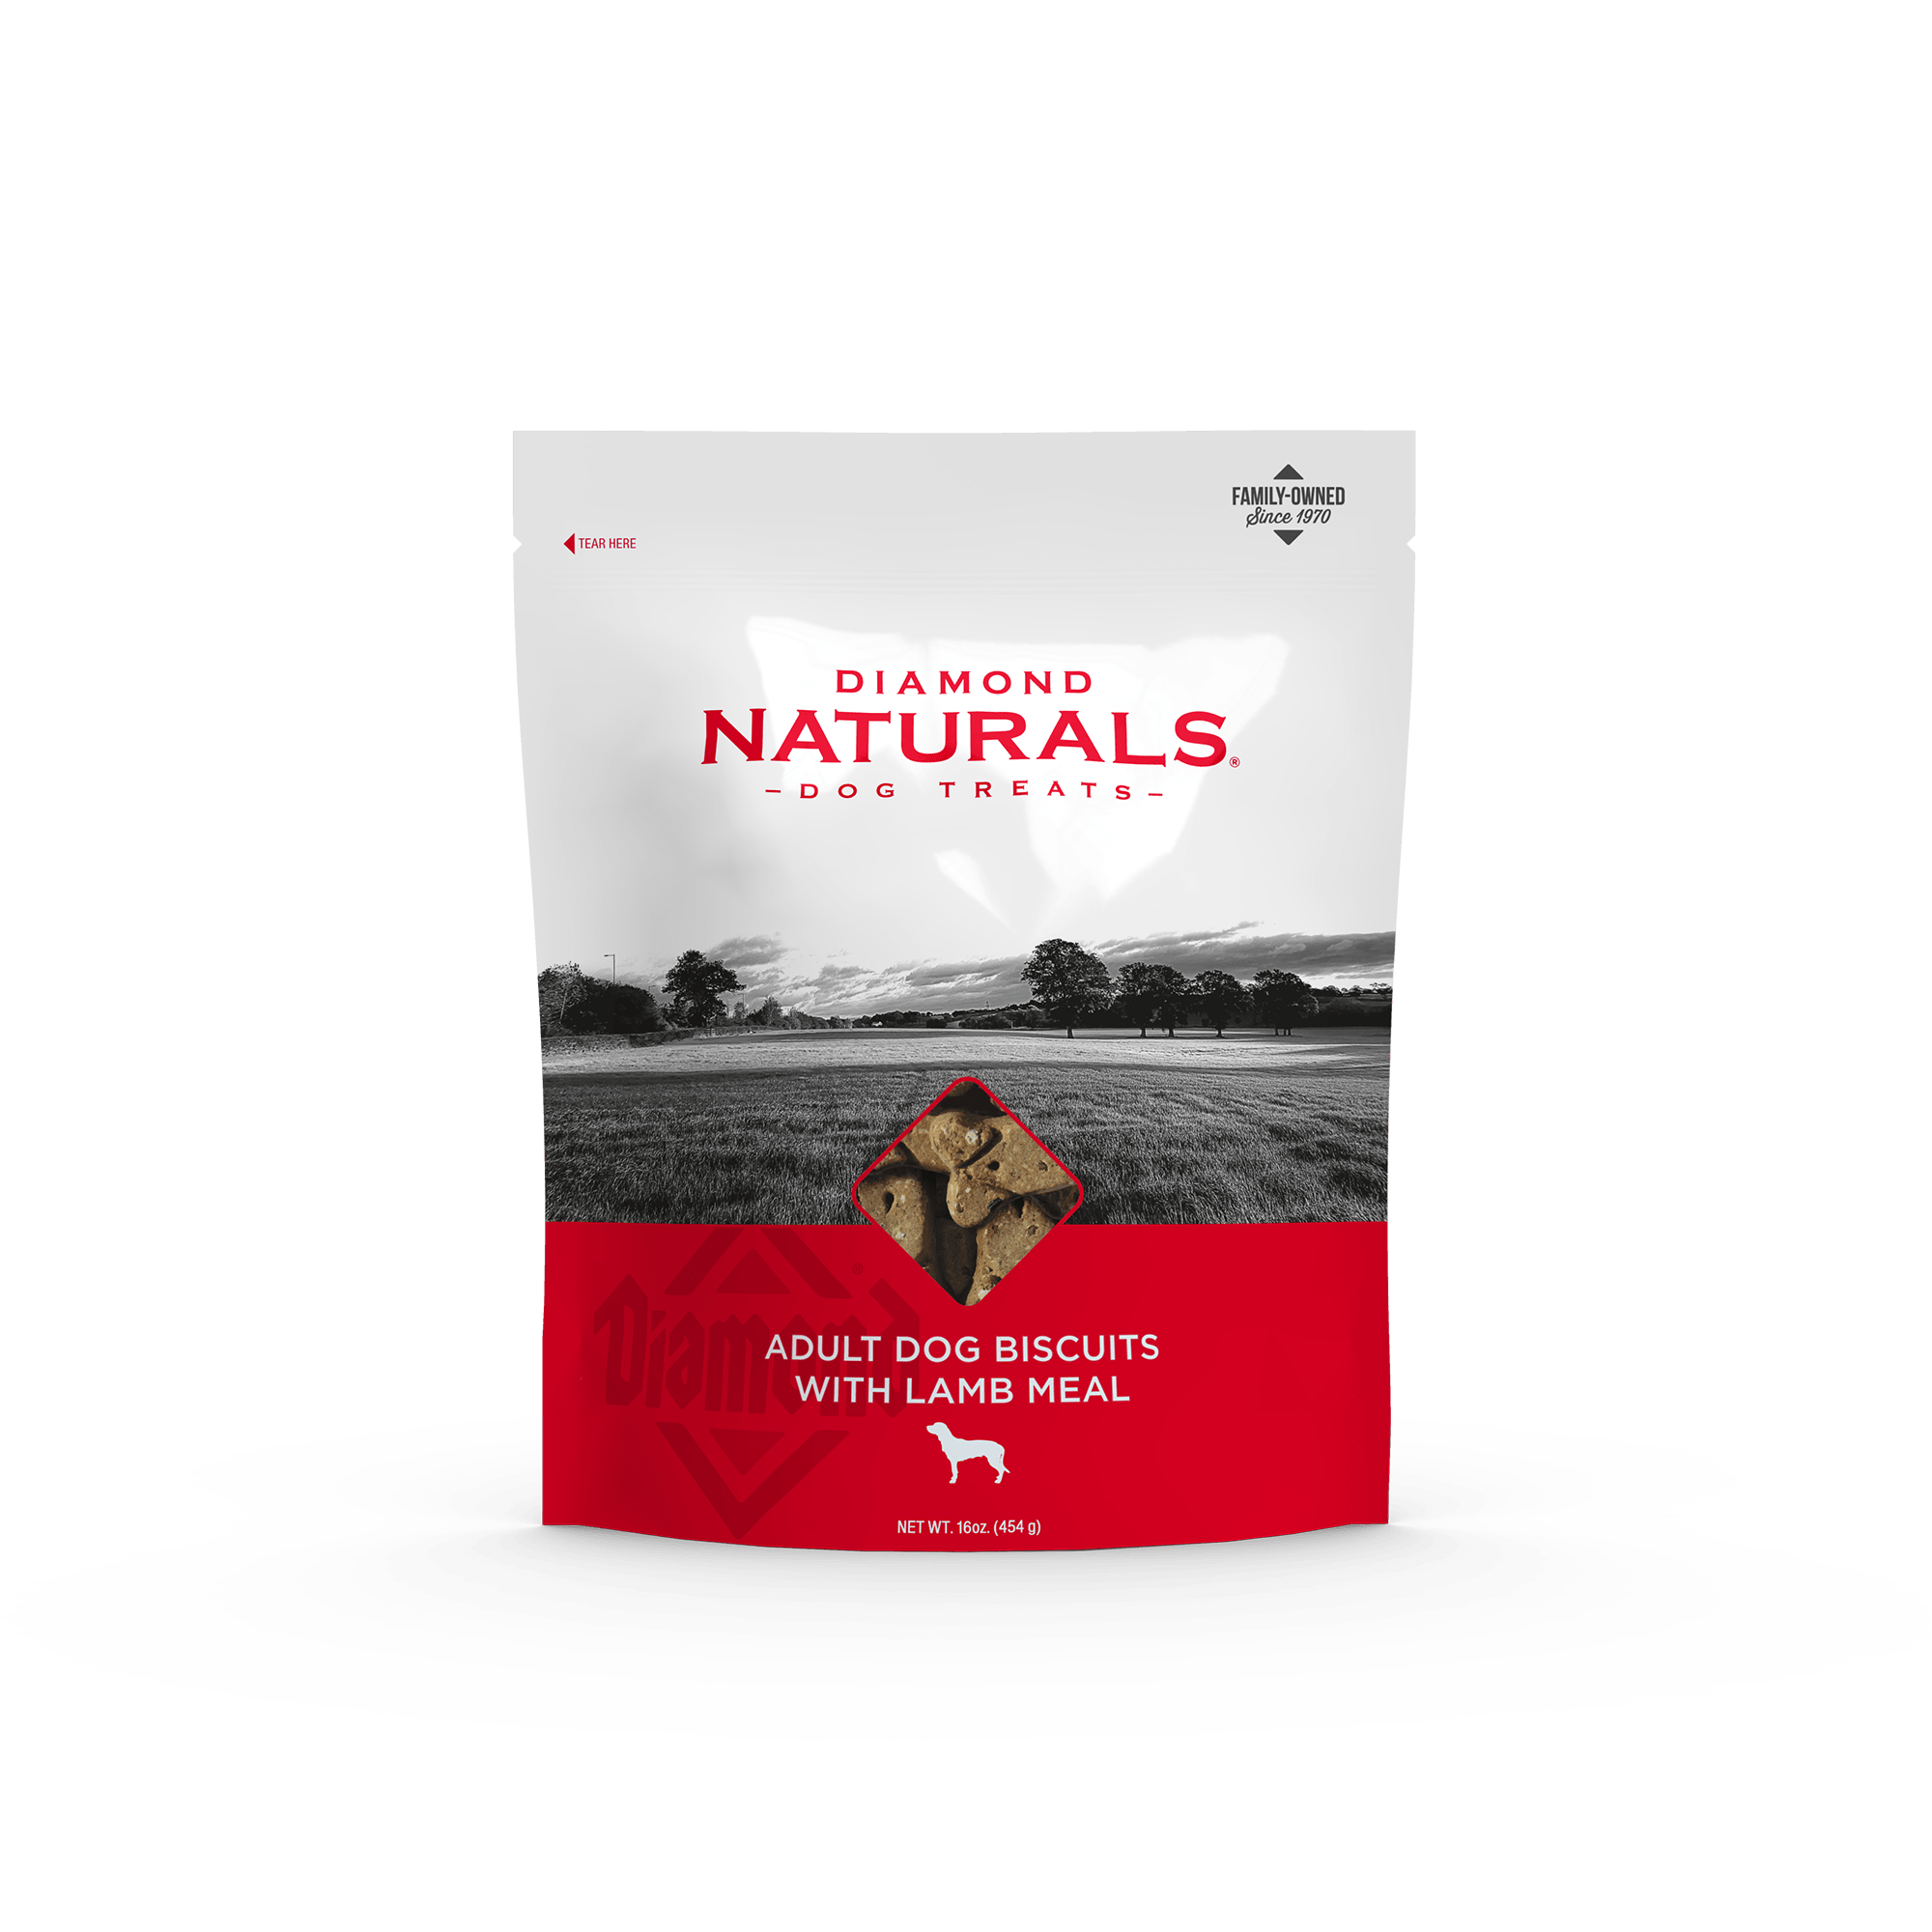 Diamond Naturals Adult Dog Biscuits with Lamb Meal product packaging